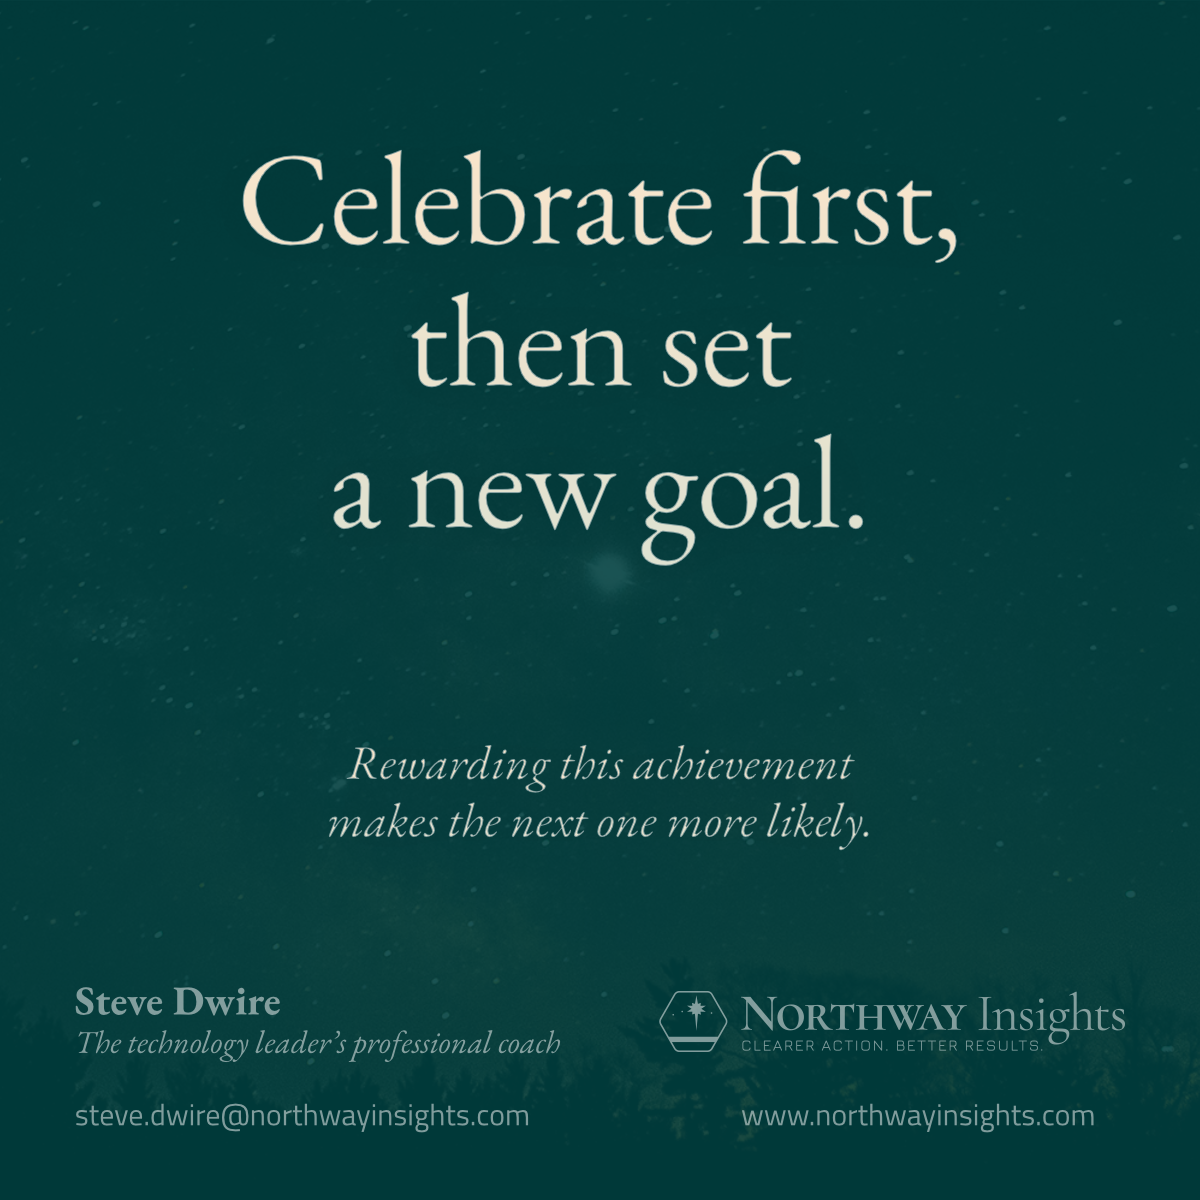 Celebrate first, then set a new goal